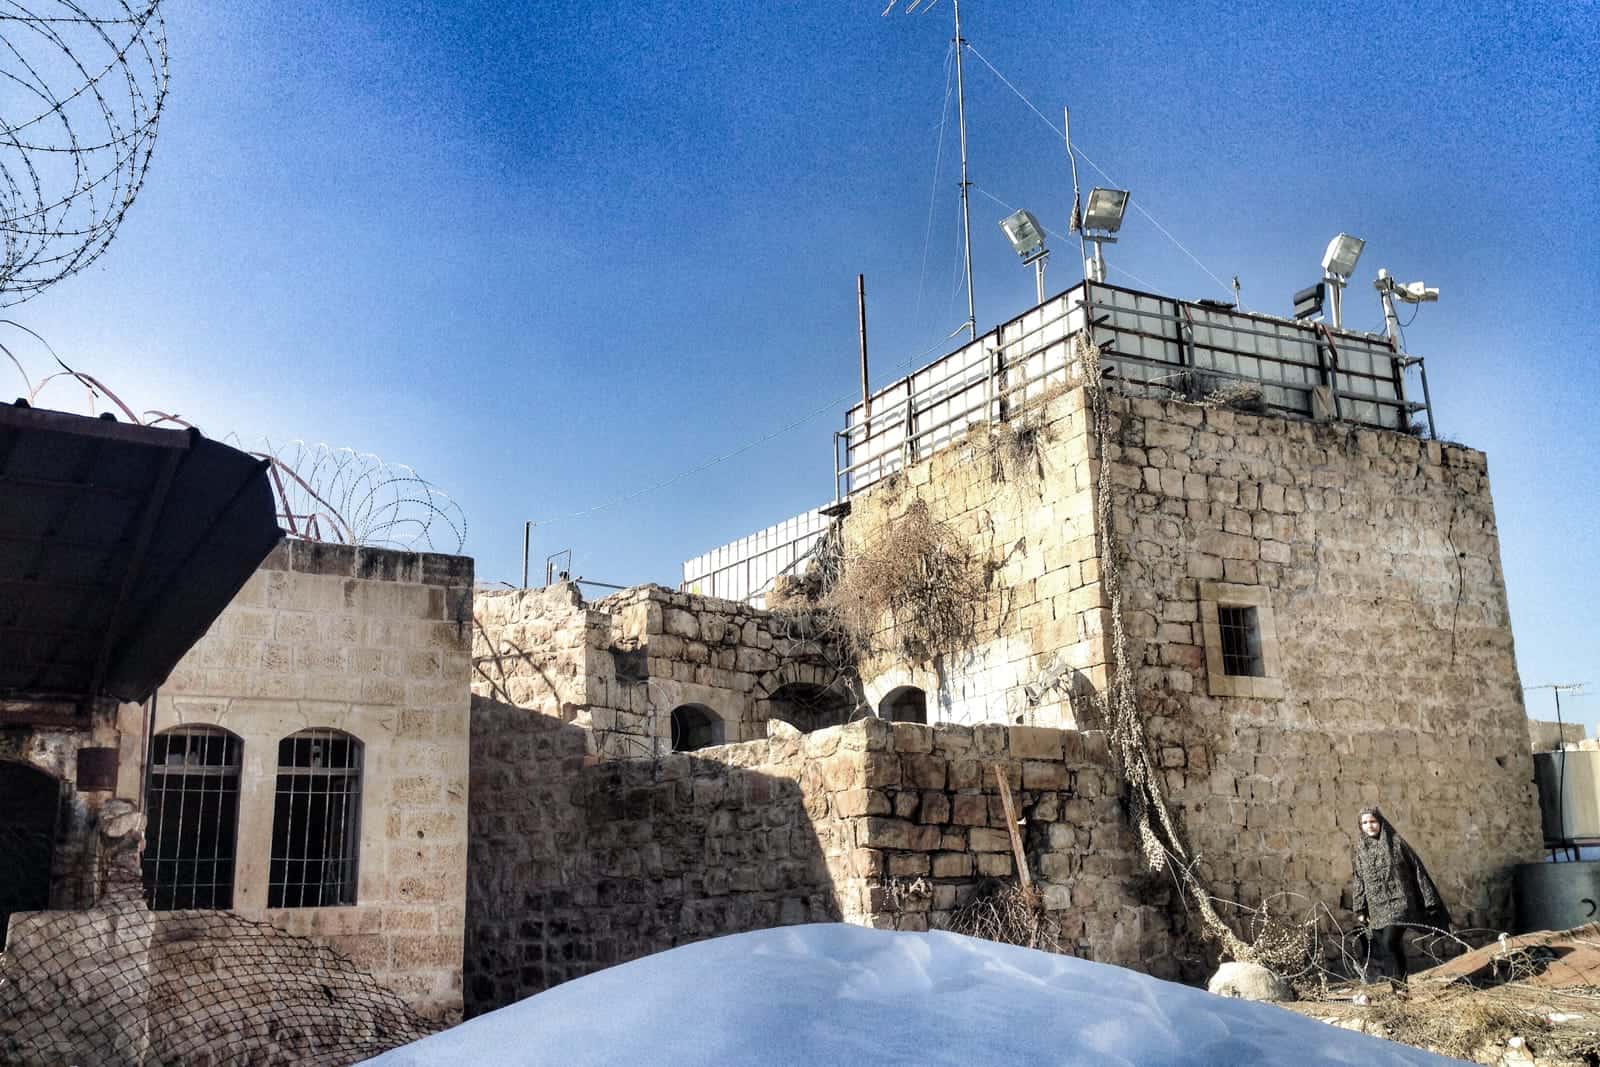 Israeli solider on Palestinian rooftop in Hebron in the West Bank, Palestine 